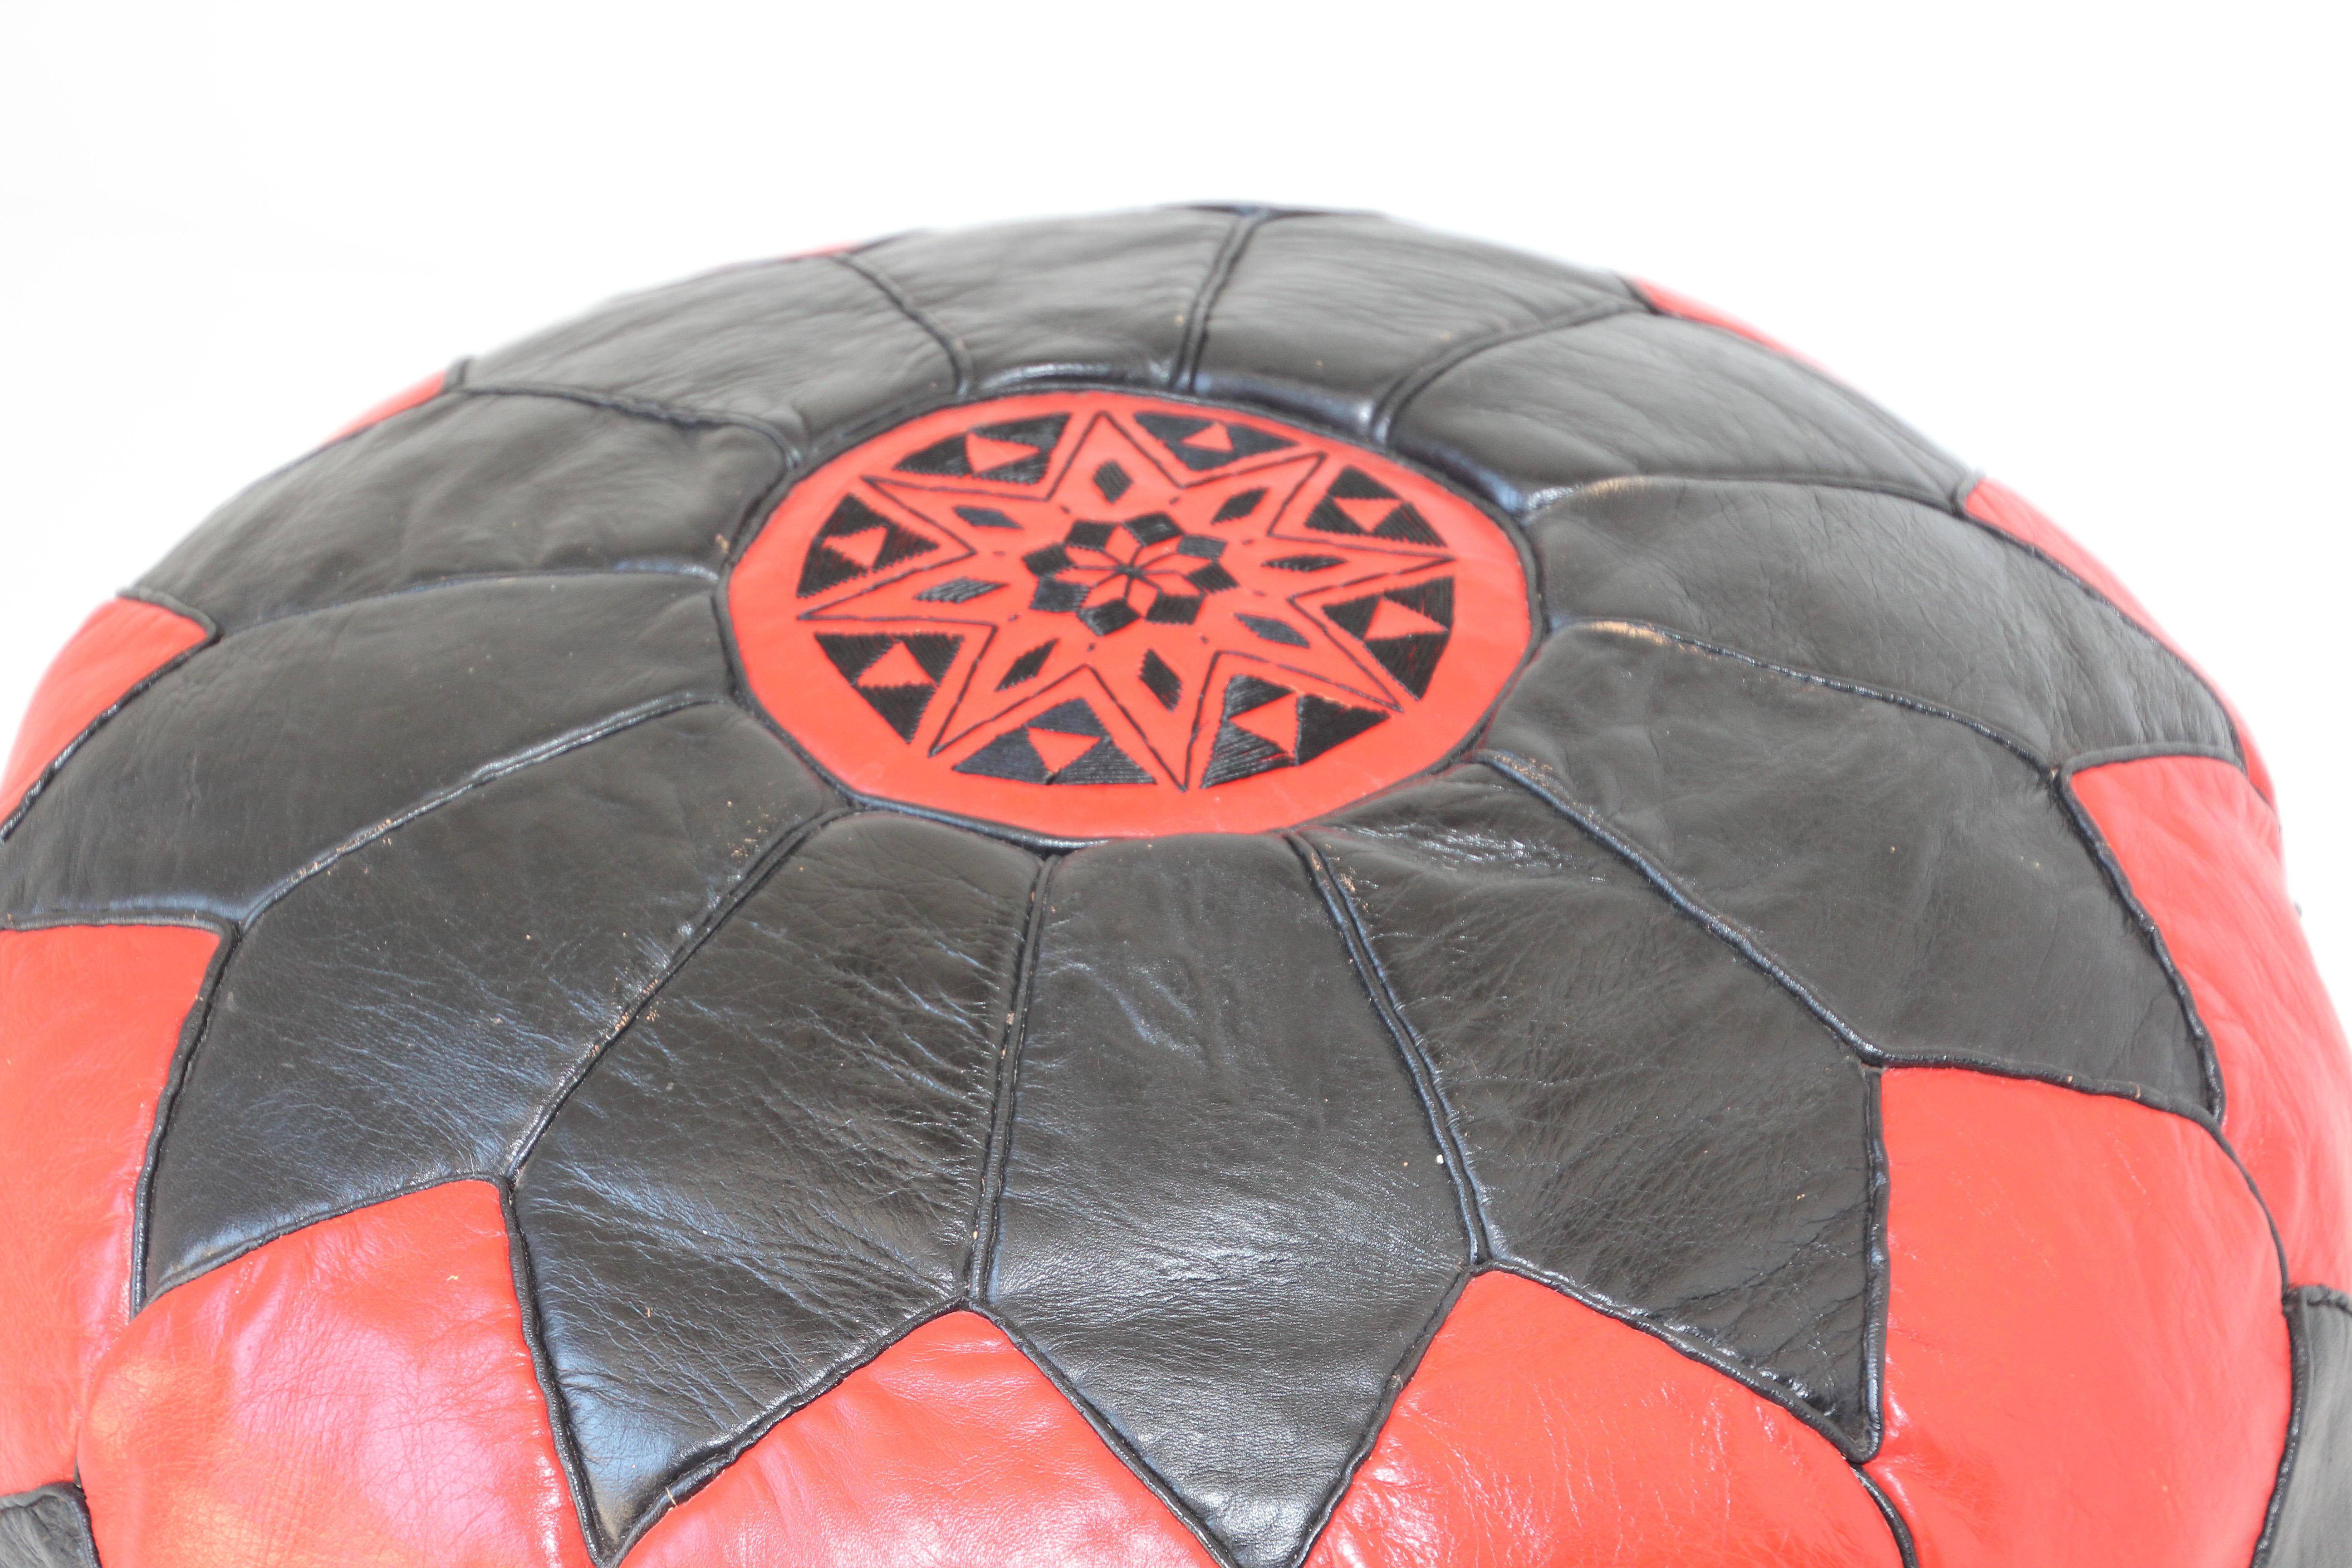 Vintage Moroccan Leather Pouf Hand-Tooled in Marrakesh Red and Black For Sale 5